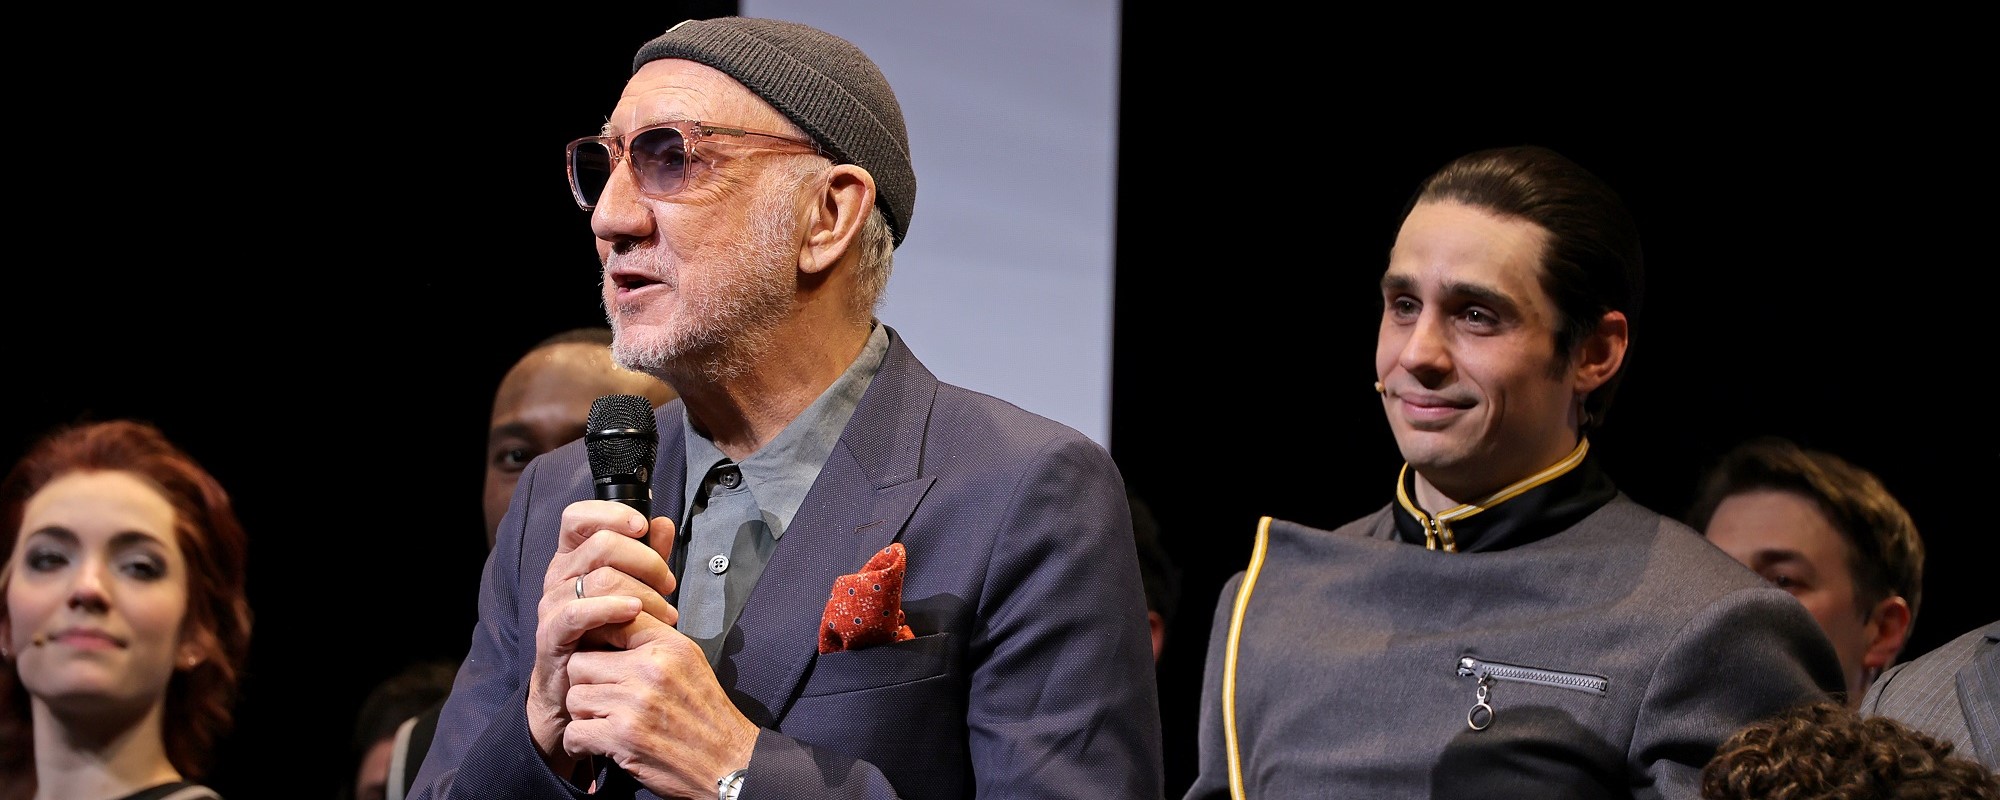 The Who’s Pete Townshend Suggests That, After ‘Tommy,’ Another Who-Related Project Could Be Turned into a Musical